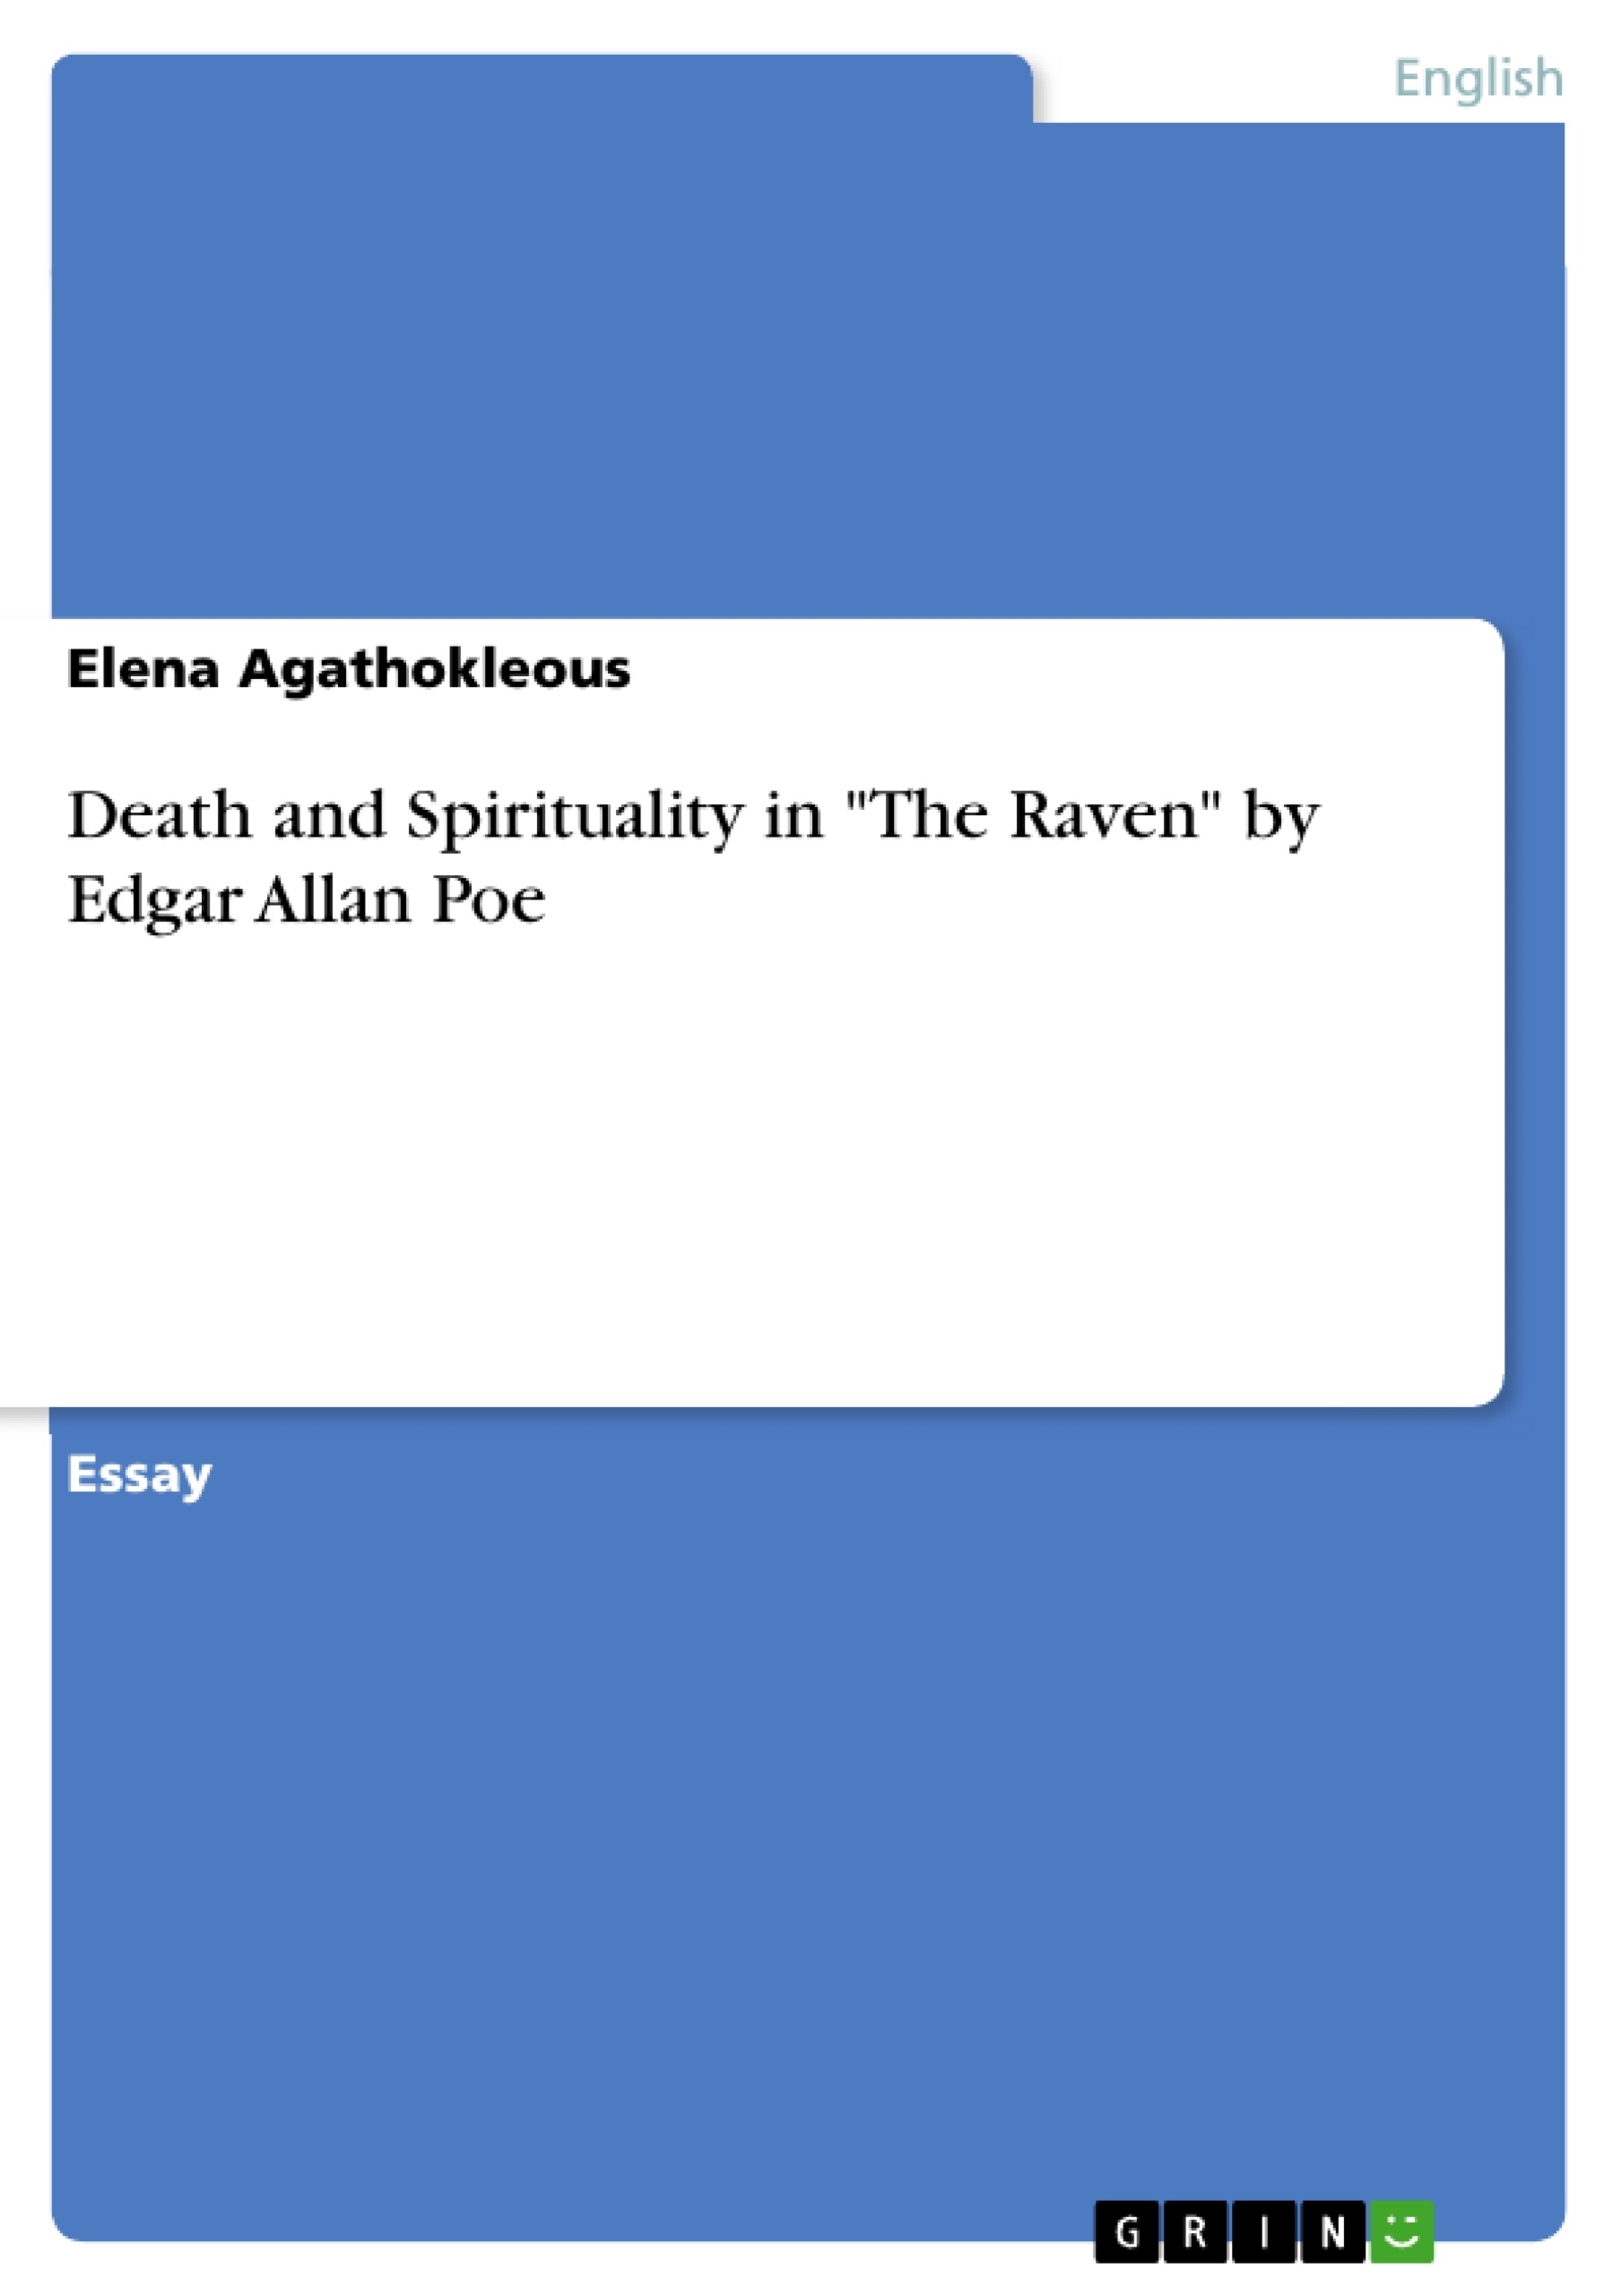 Title: Death and Spirituality in "The Raven" by Edgar Allan Poe